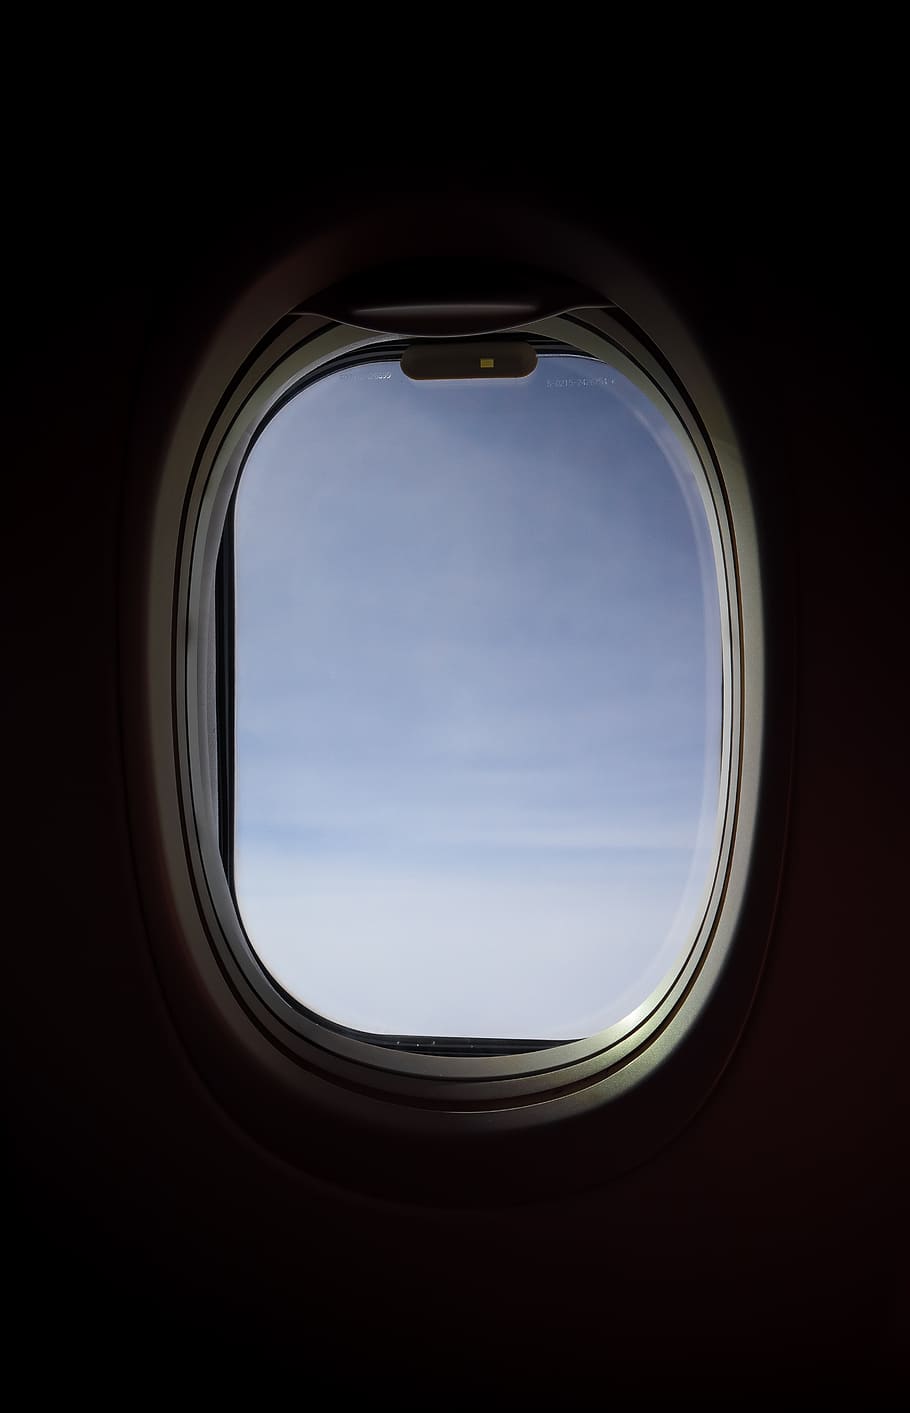 window shade, airplane, window, travel, flight, sky, clouds, airline, plane, fly